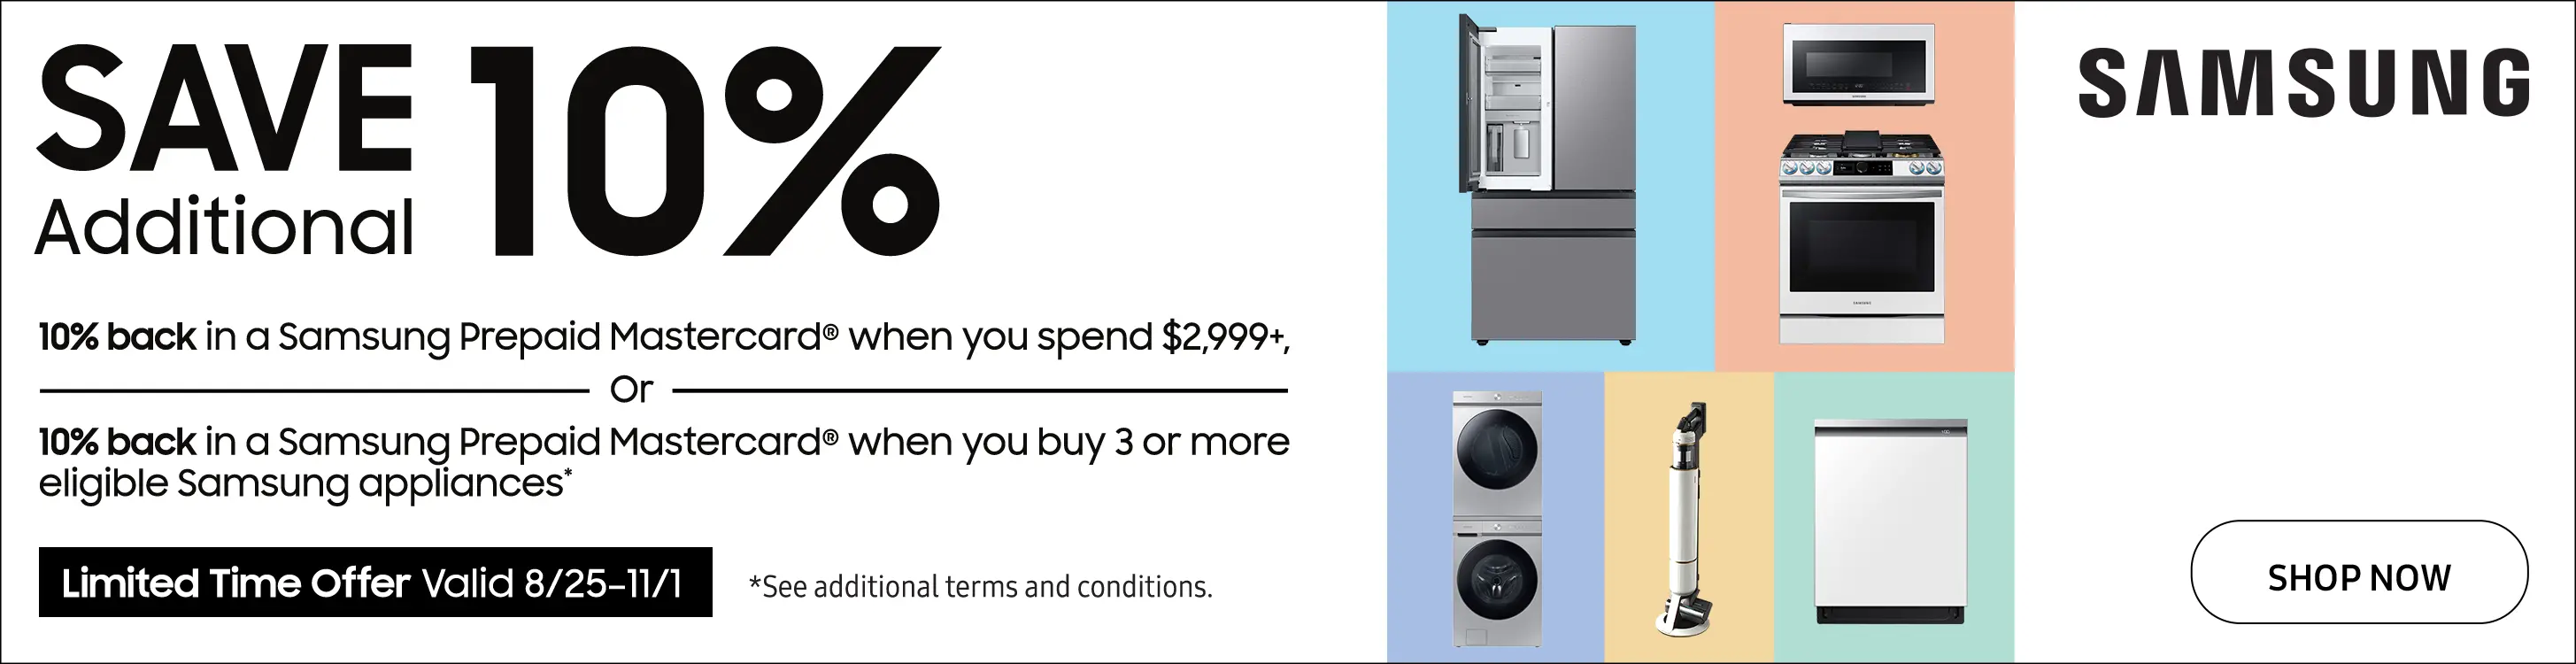 Save an additional 10% back in a Samsung Prepaid Mastercard when you spend $2999+ or 10% back in a Samsung Prepaid Mastercard when you buy 3 or more eligible Samsung appliances. Limited Time Offer valid from 8/25/22 to 11/1/22.